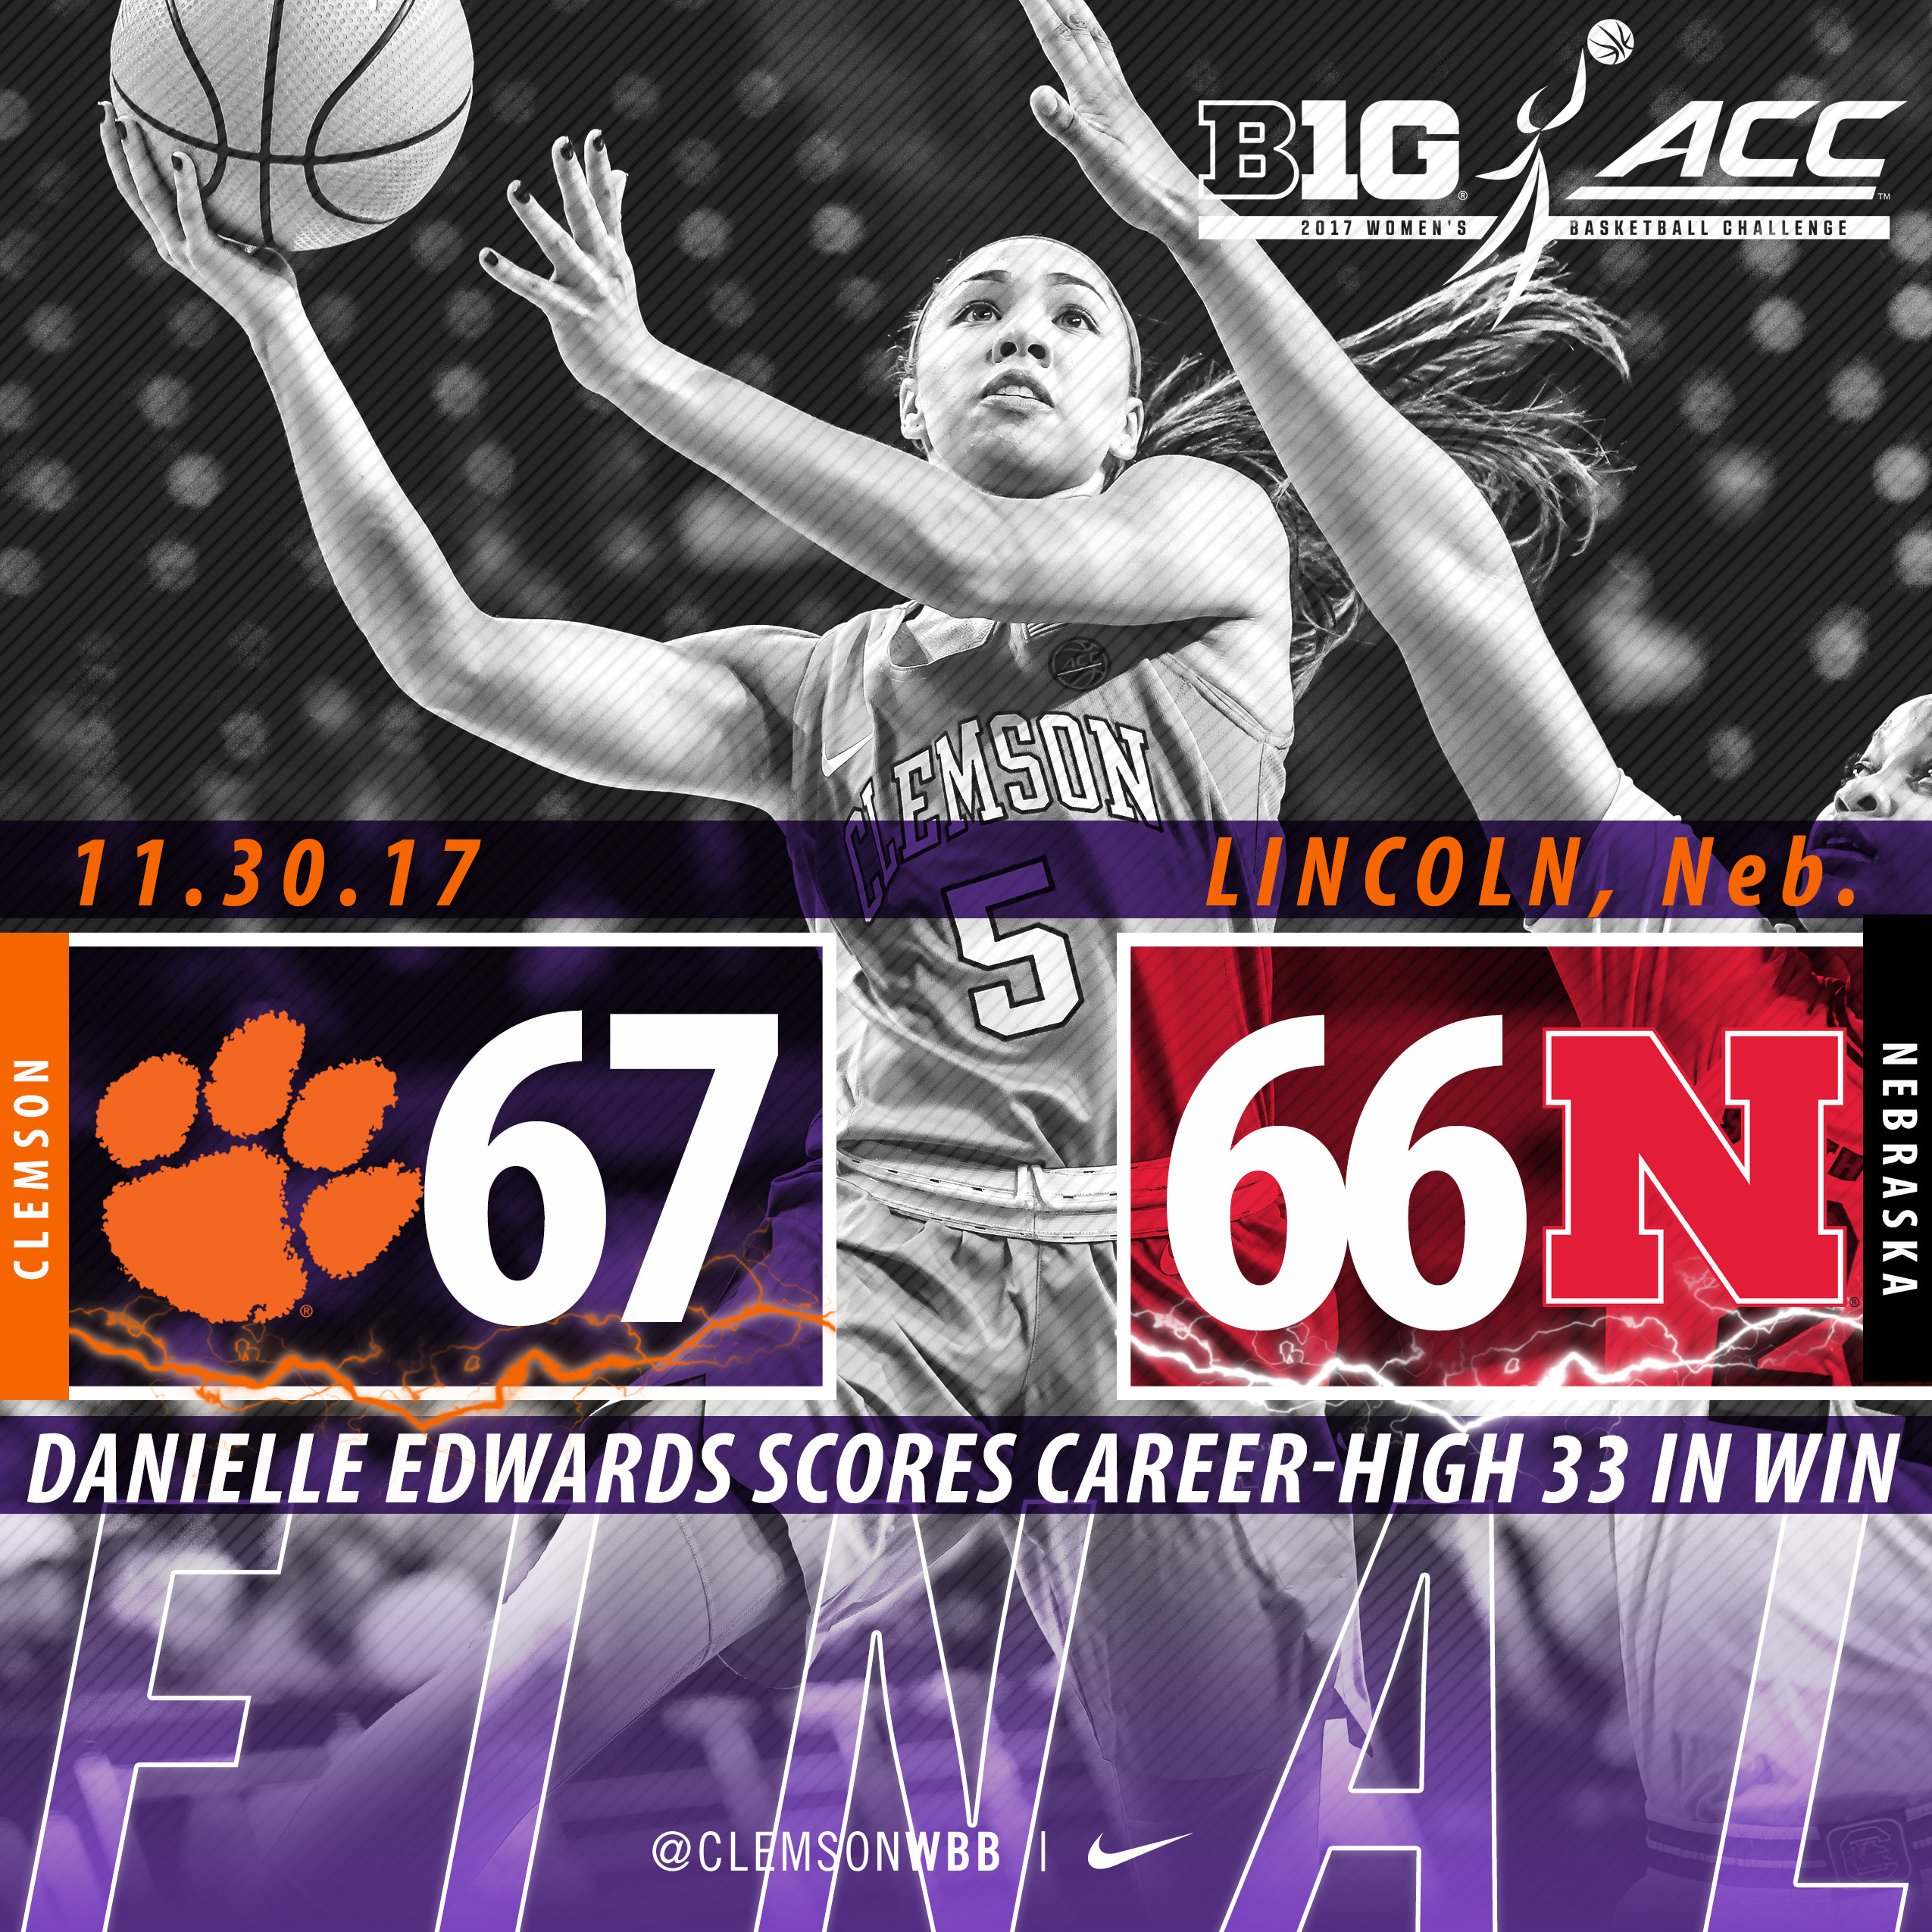 Edwards' Career High Leads Tigers to Thrilling Win at Nebraska